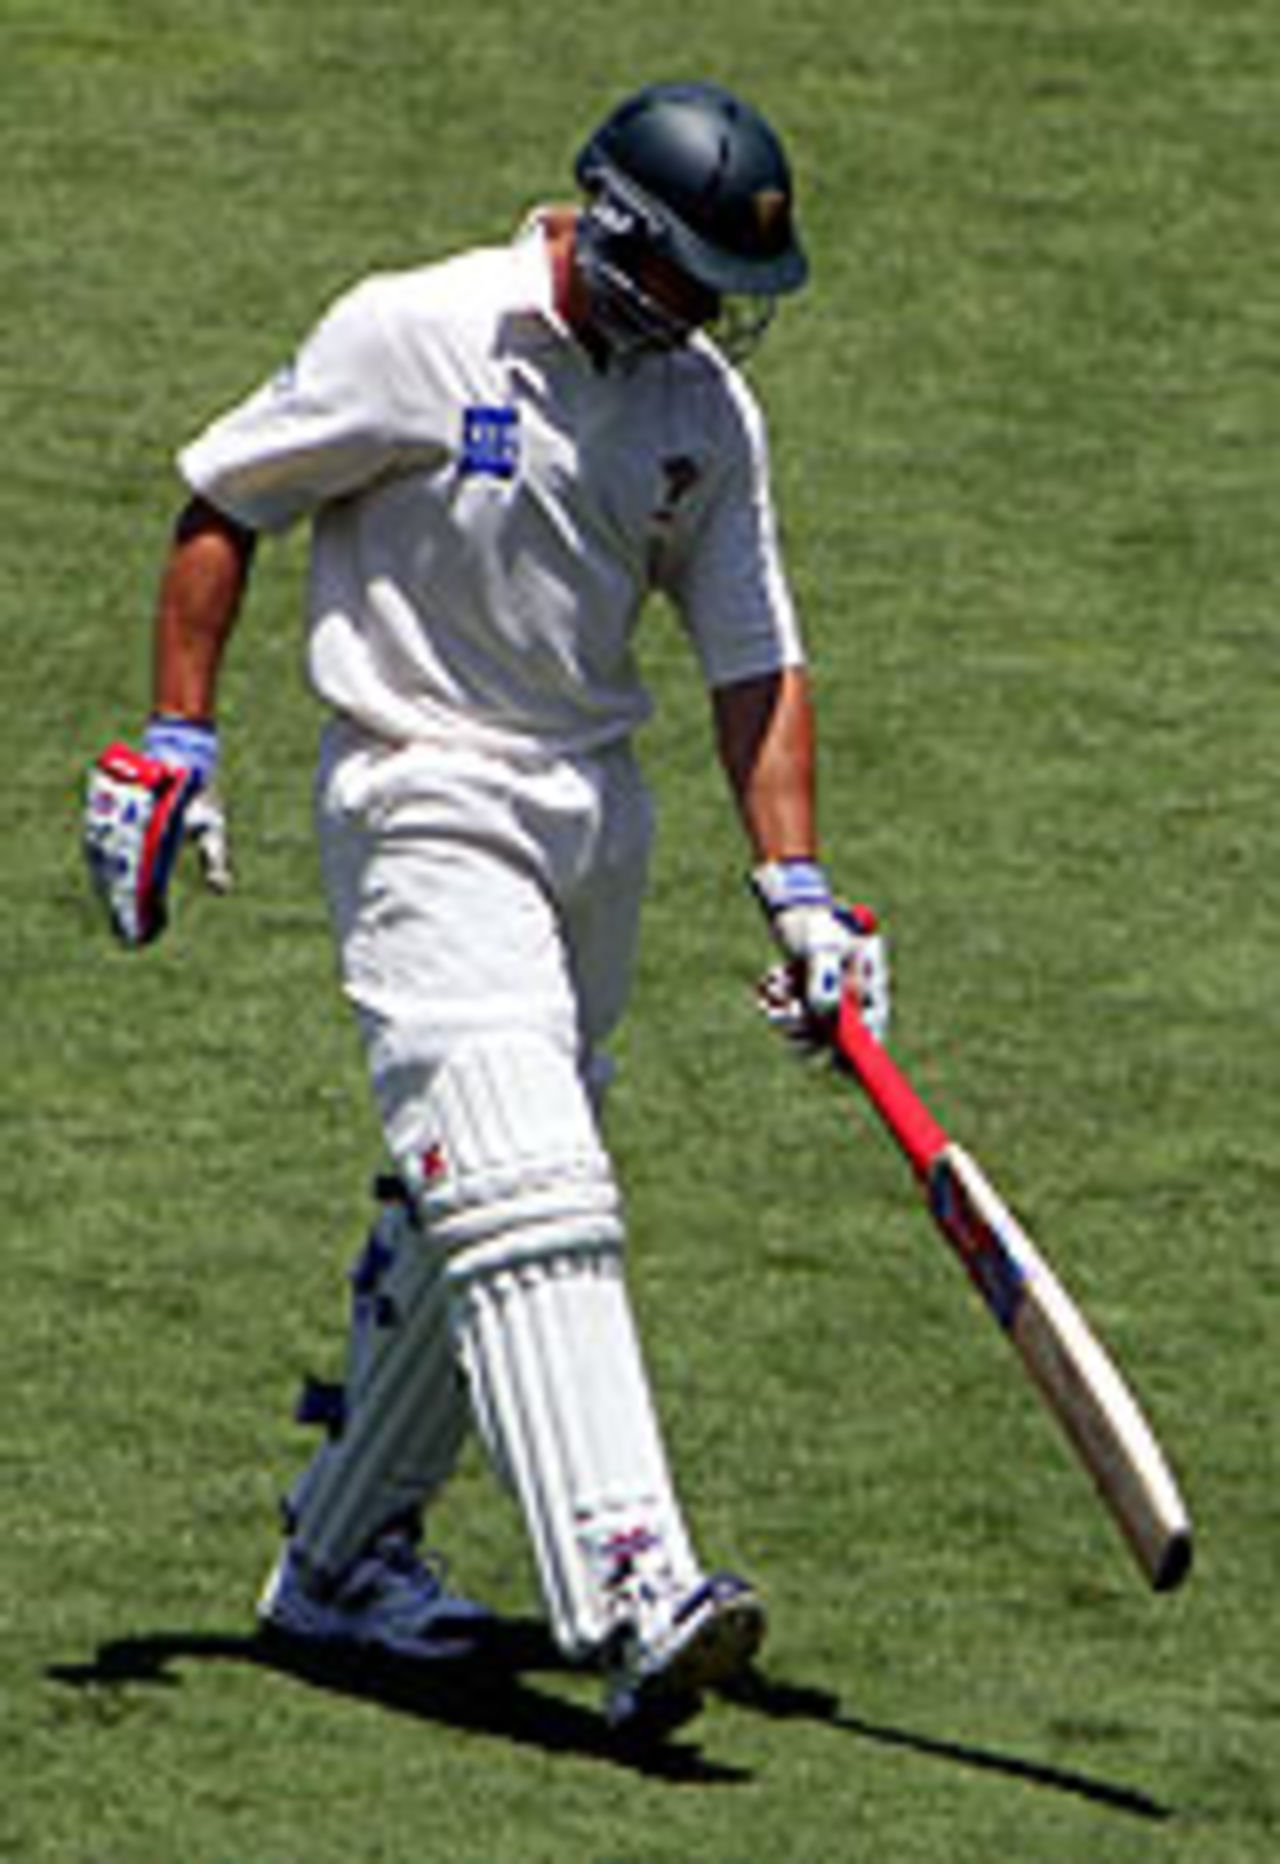 Michael Bevan walks away after being dismissed, New South Wales v Tasmania, Pura Cup, 1st day, SCG, December 16, 2004